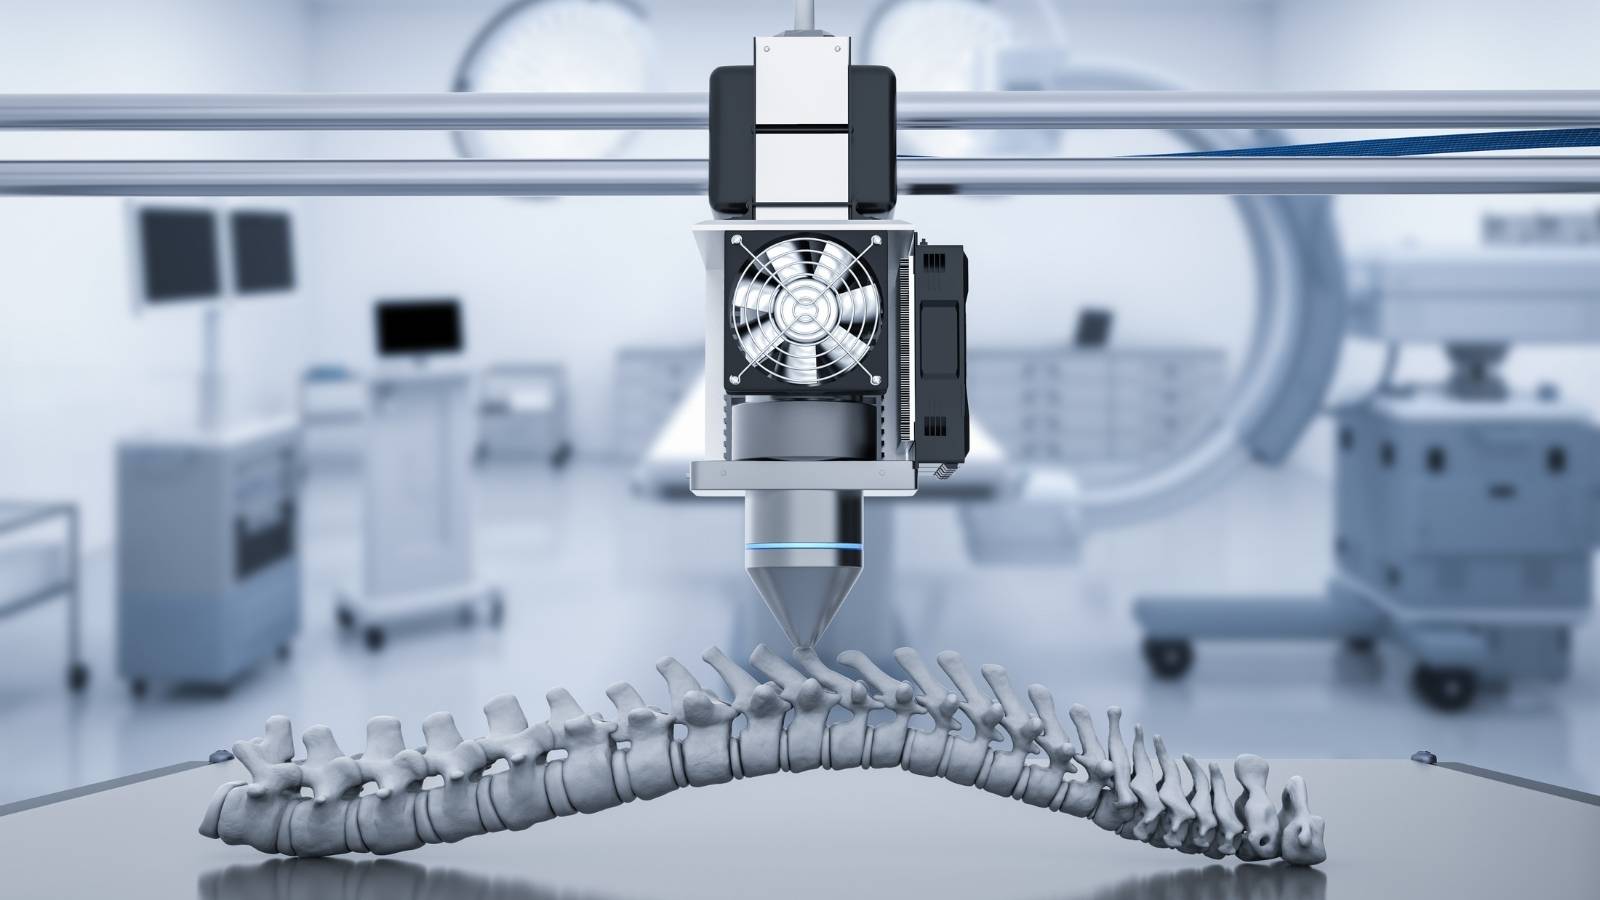 Præstation Eksklusiv Machu Picchu 3D printing enables patient-specific medical devices for a better quality  of care | QbD Group